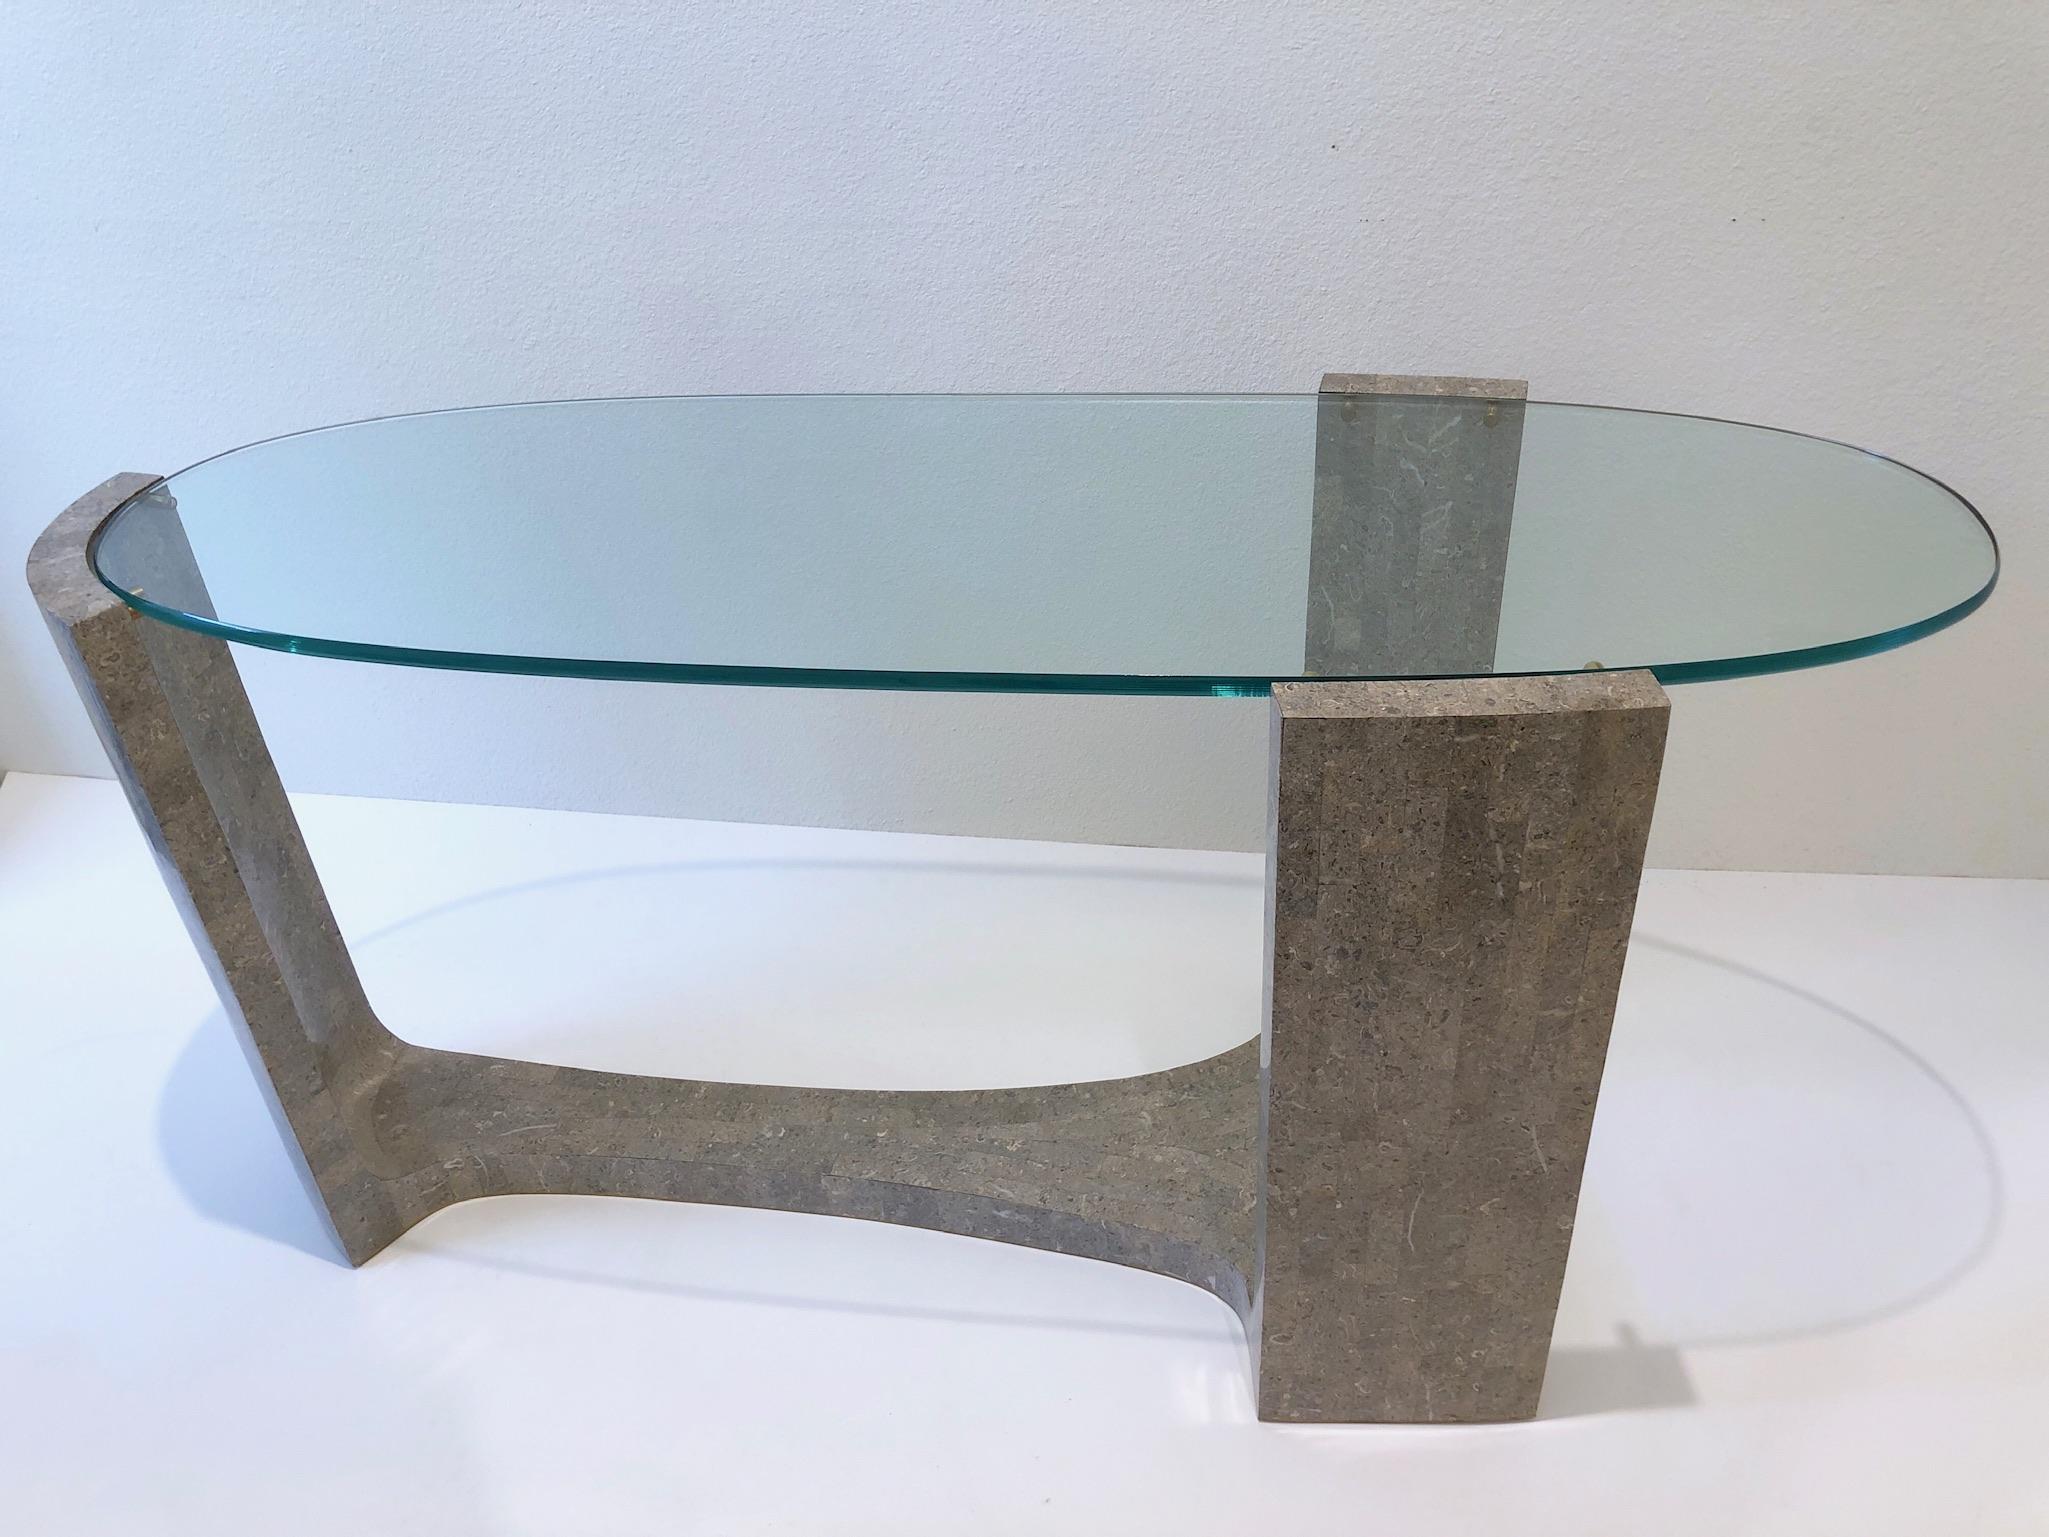 1980’s sculptural console table by Maitland Smith.
Constructed of wood covered with tessellated gray marble, oval glass top and brass details.
Measurements: 28.25” high, 57.5” wide and 21.5” deep.